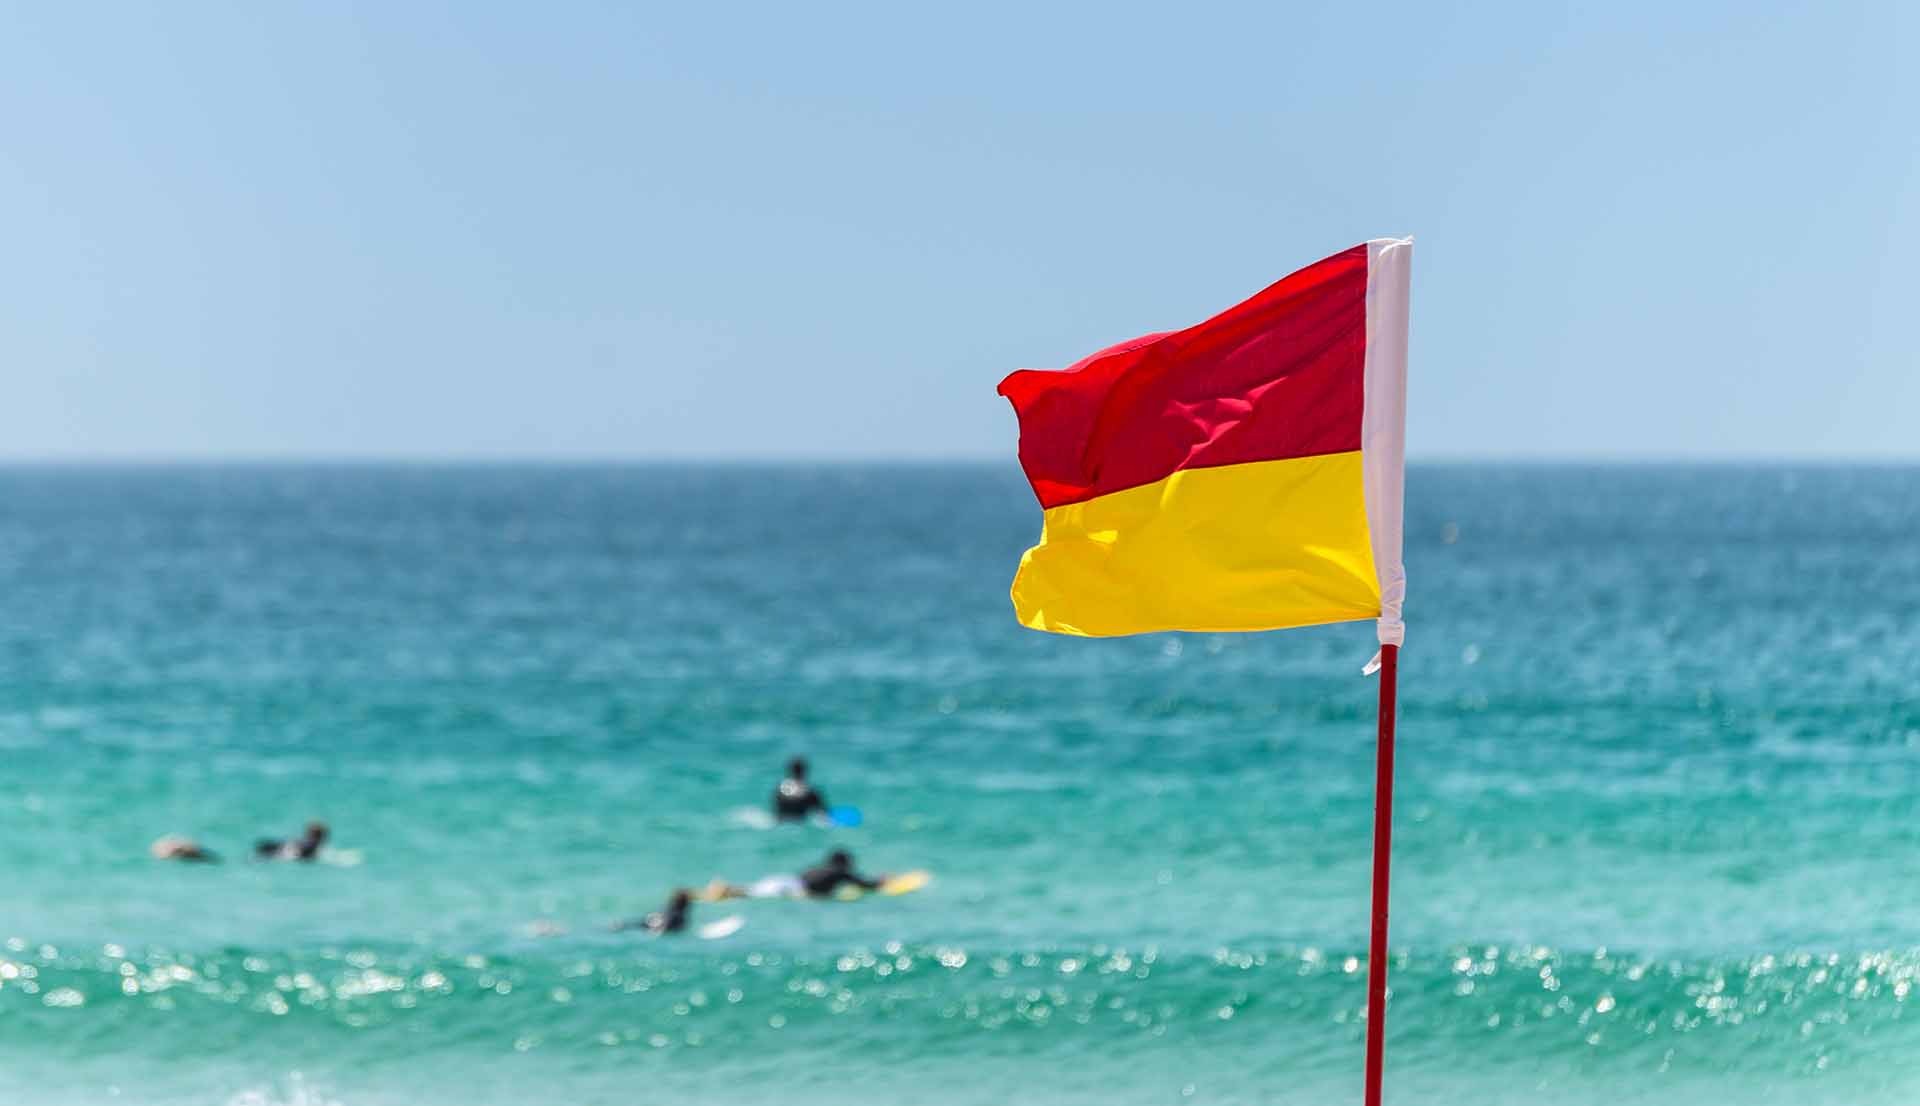 Red and yellow flag marking the limit of the safe swimming area on a beach under a blue summer sky